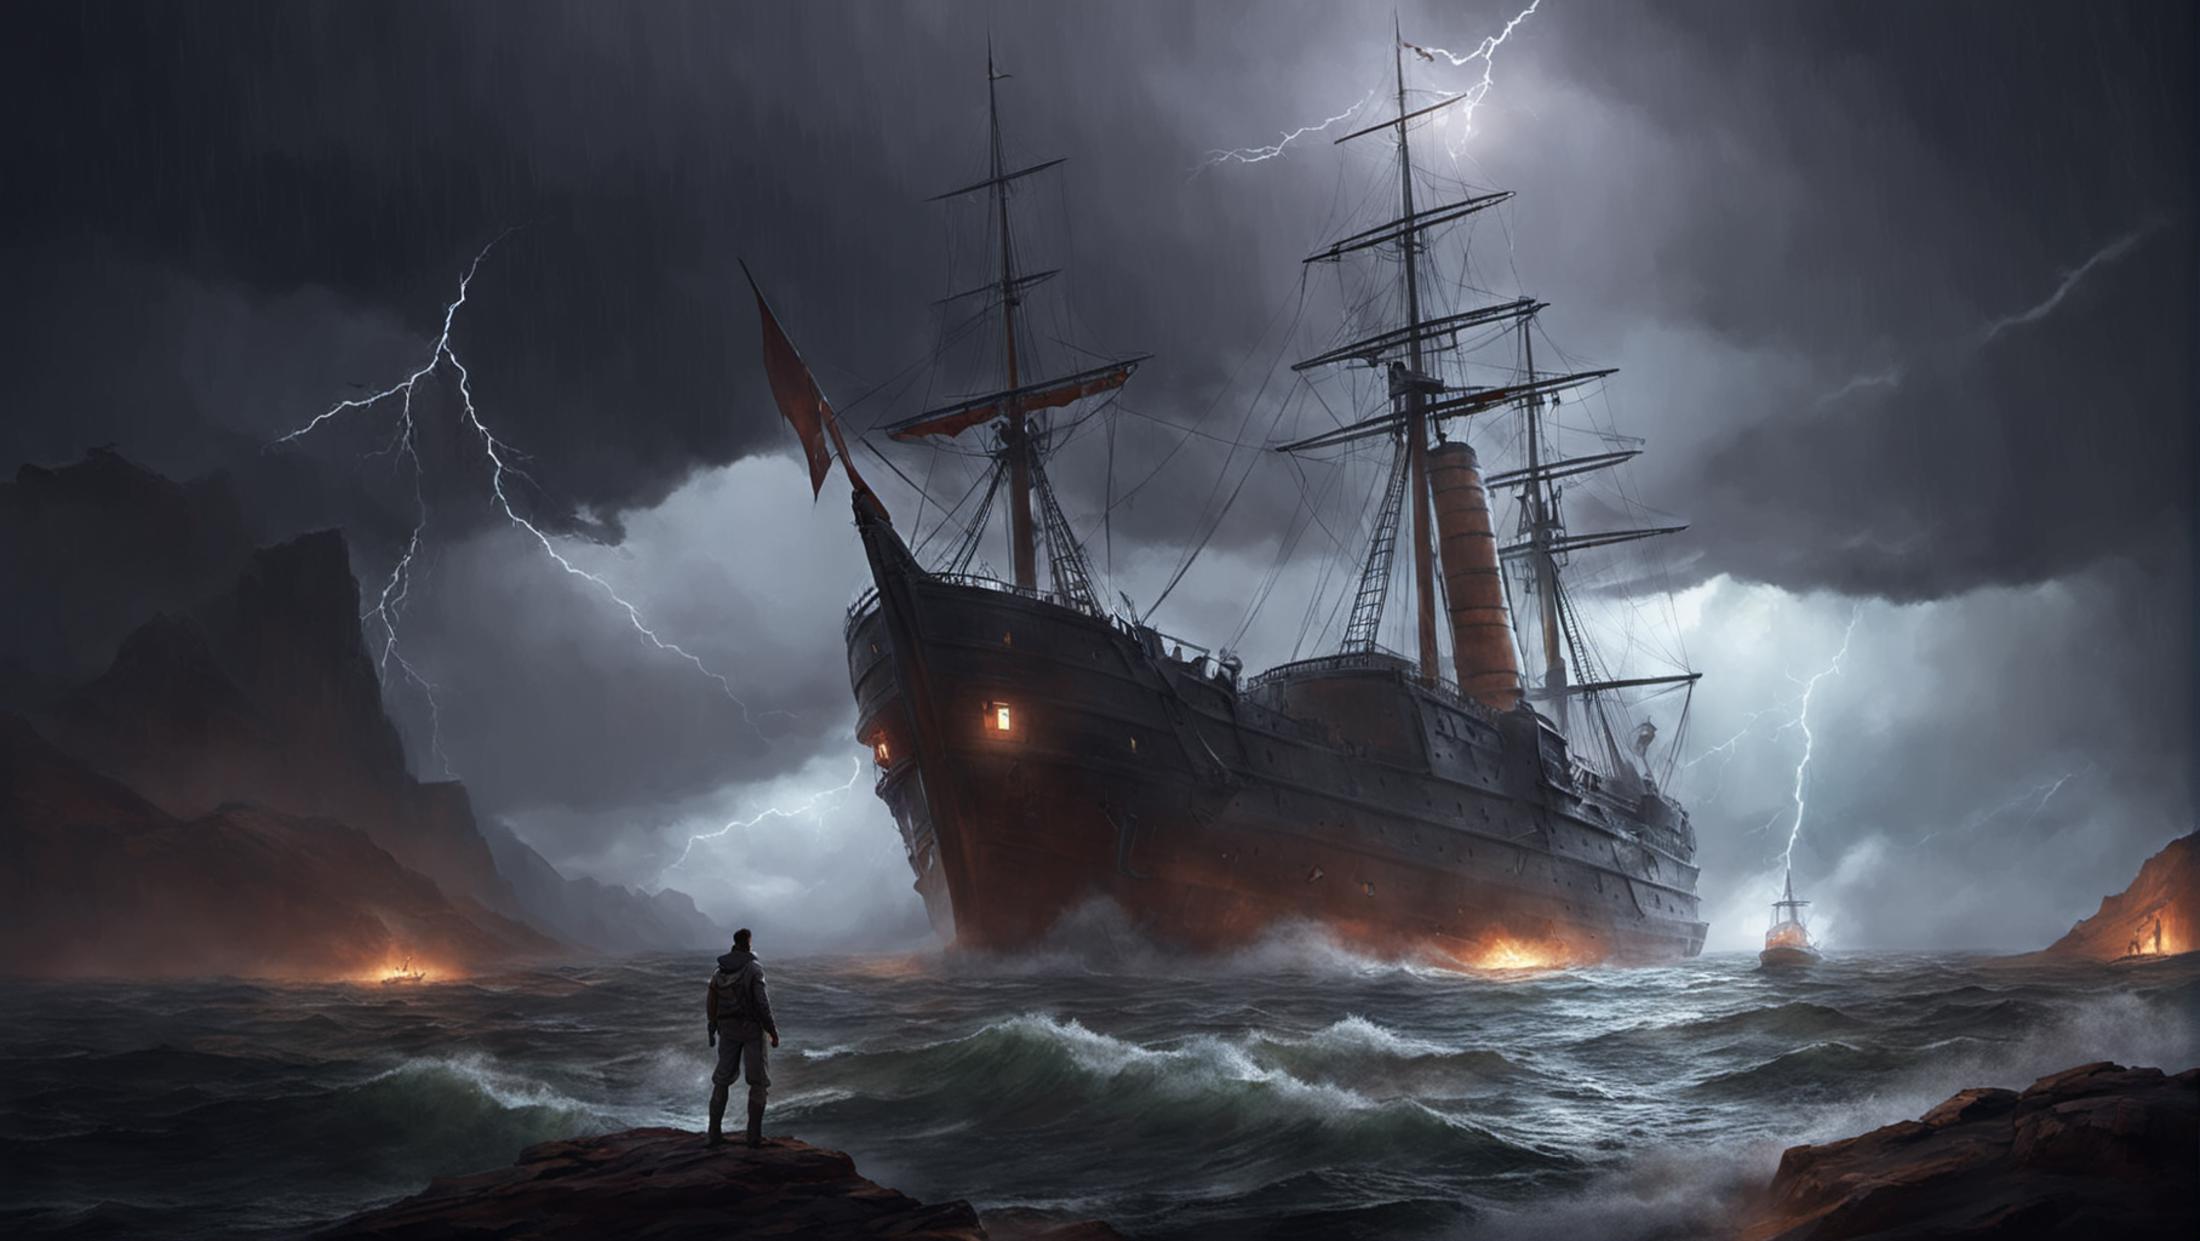 A person standing on a rocky cliff overlooking a large, dark ship on a stormy sea.